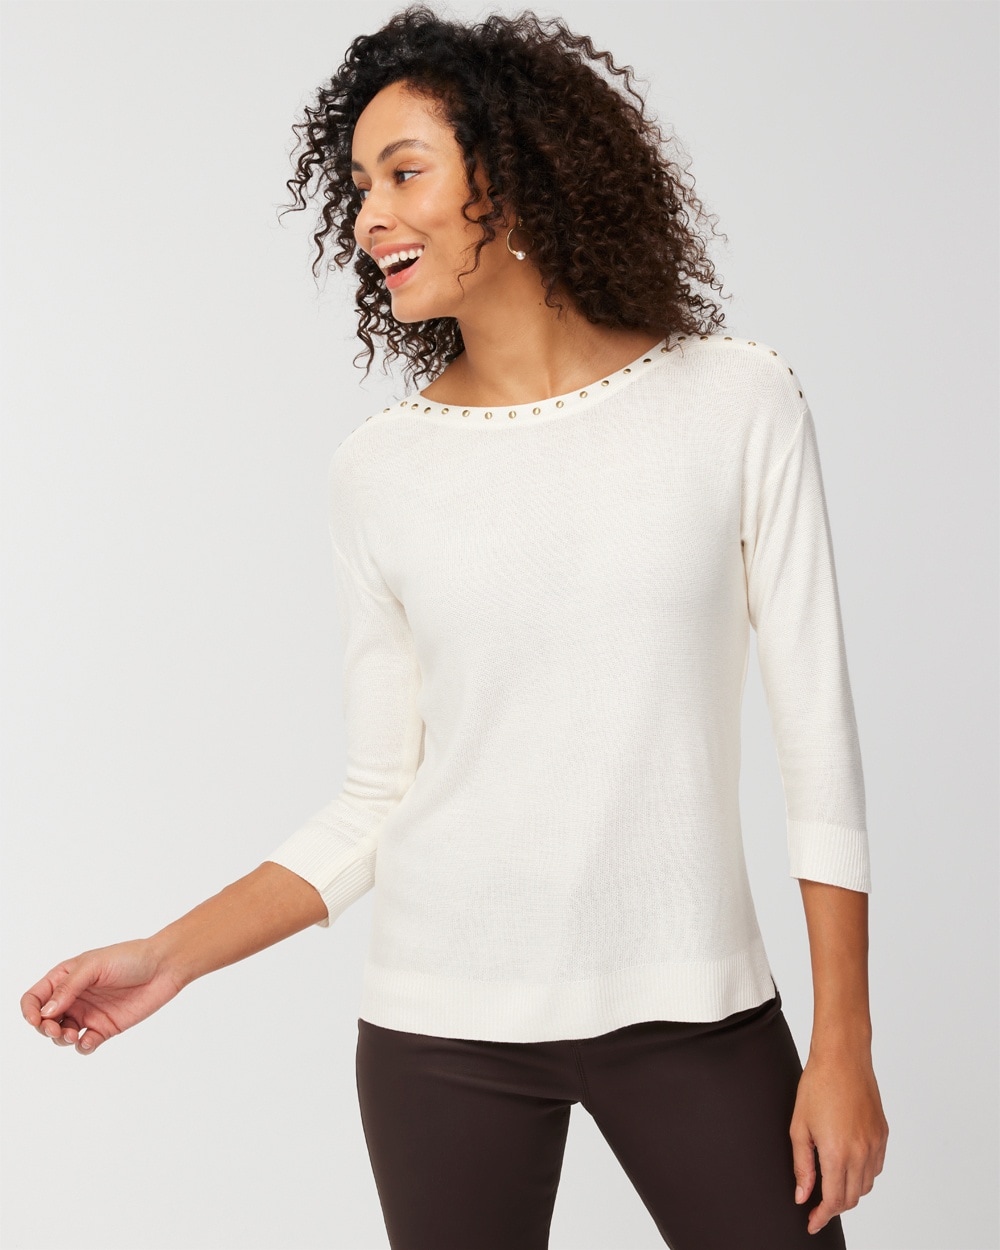 Embellished Bateau Neck Sweater - Chico\'s Off The Rack - Chico\'s Outlet